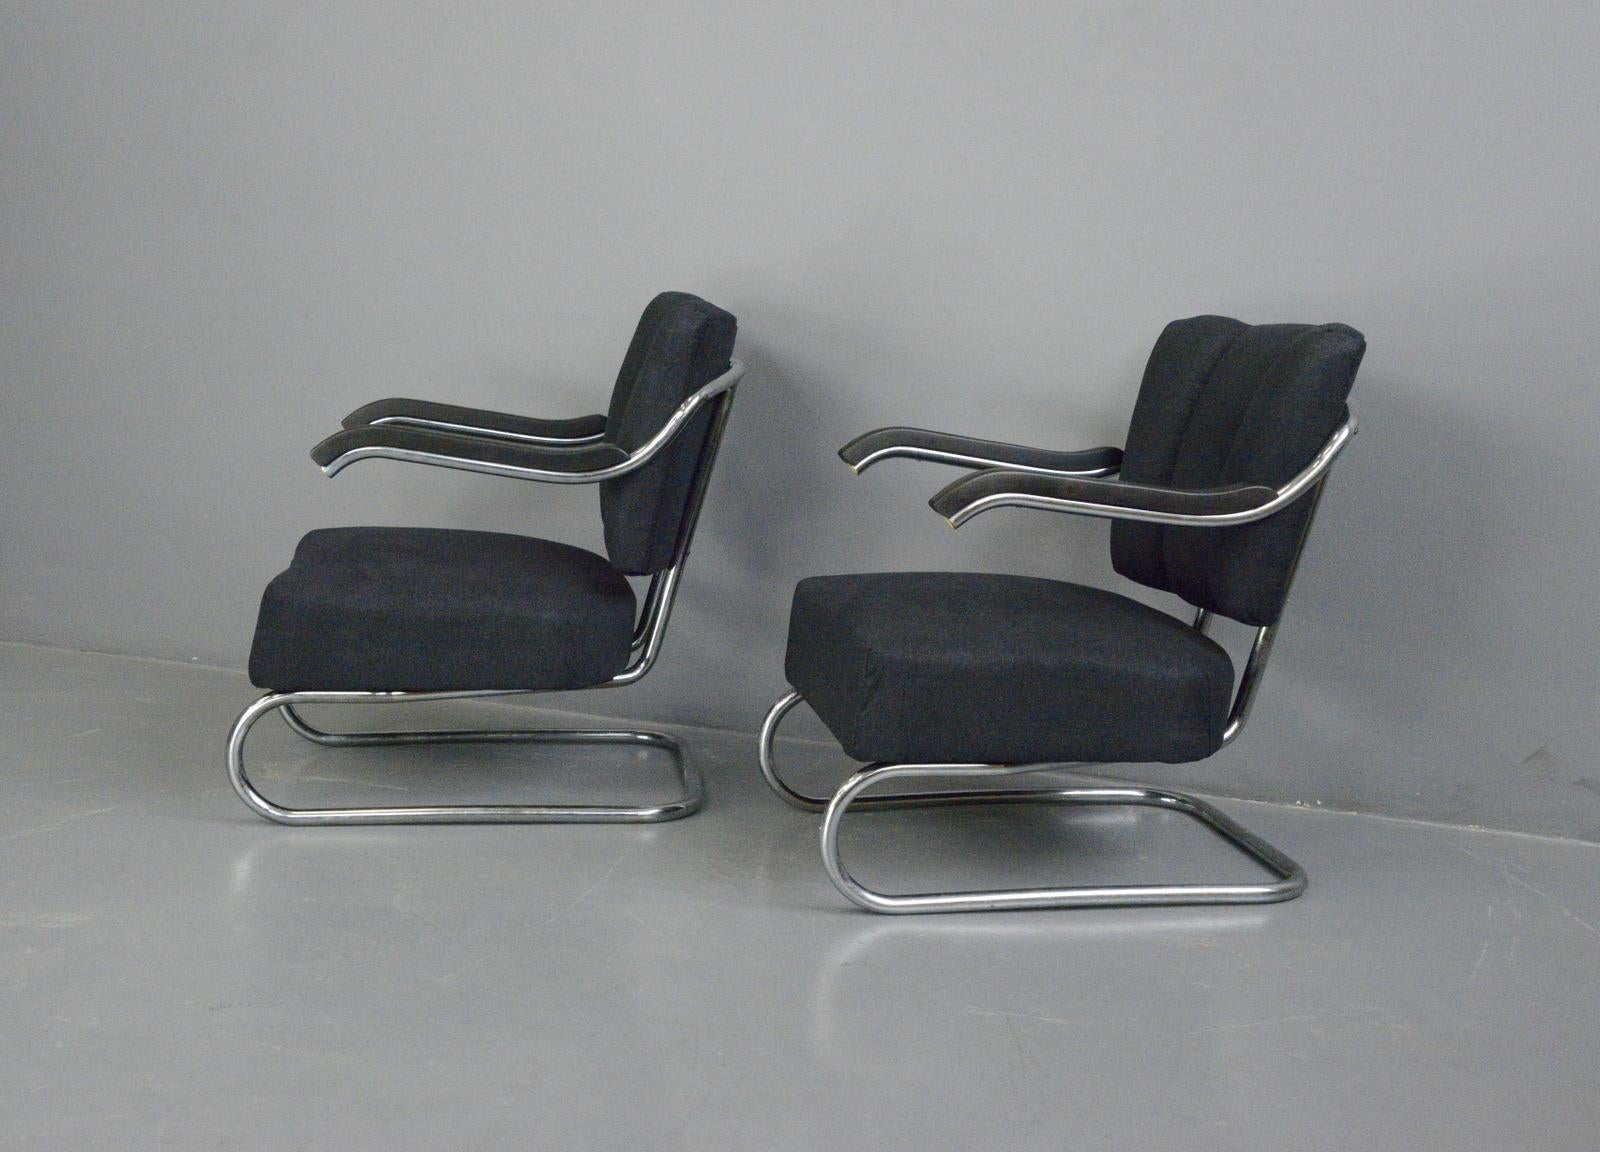 Bauhaus armchairs by Mucke Melder Circa 1930s

- Price is for the pair
- Chromed tubular steel frames
- Sprung seats and cantilever frames
- New black/charcoal plush upholstery
- Black stained beech arms
- Produced by Mucke Melder
- Czech ~